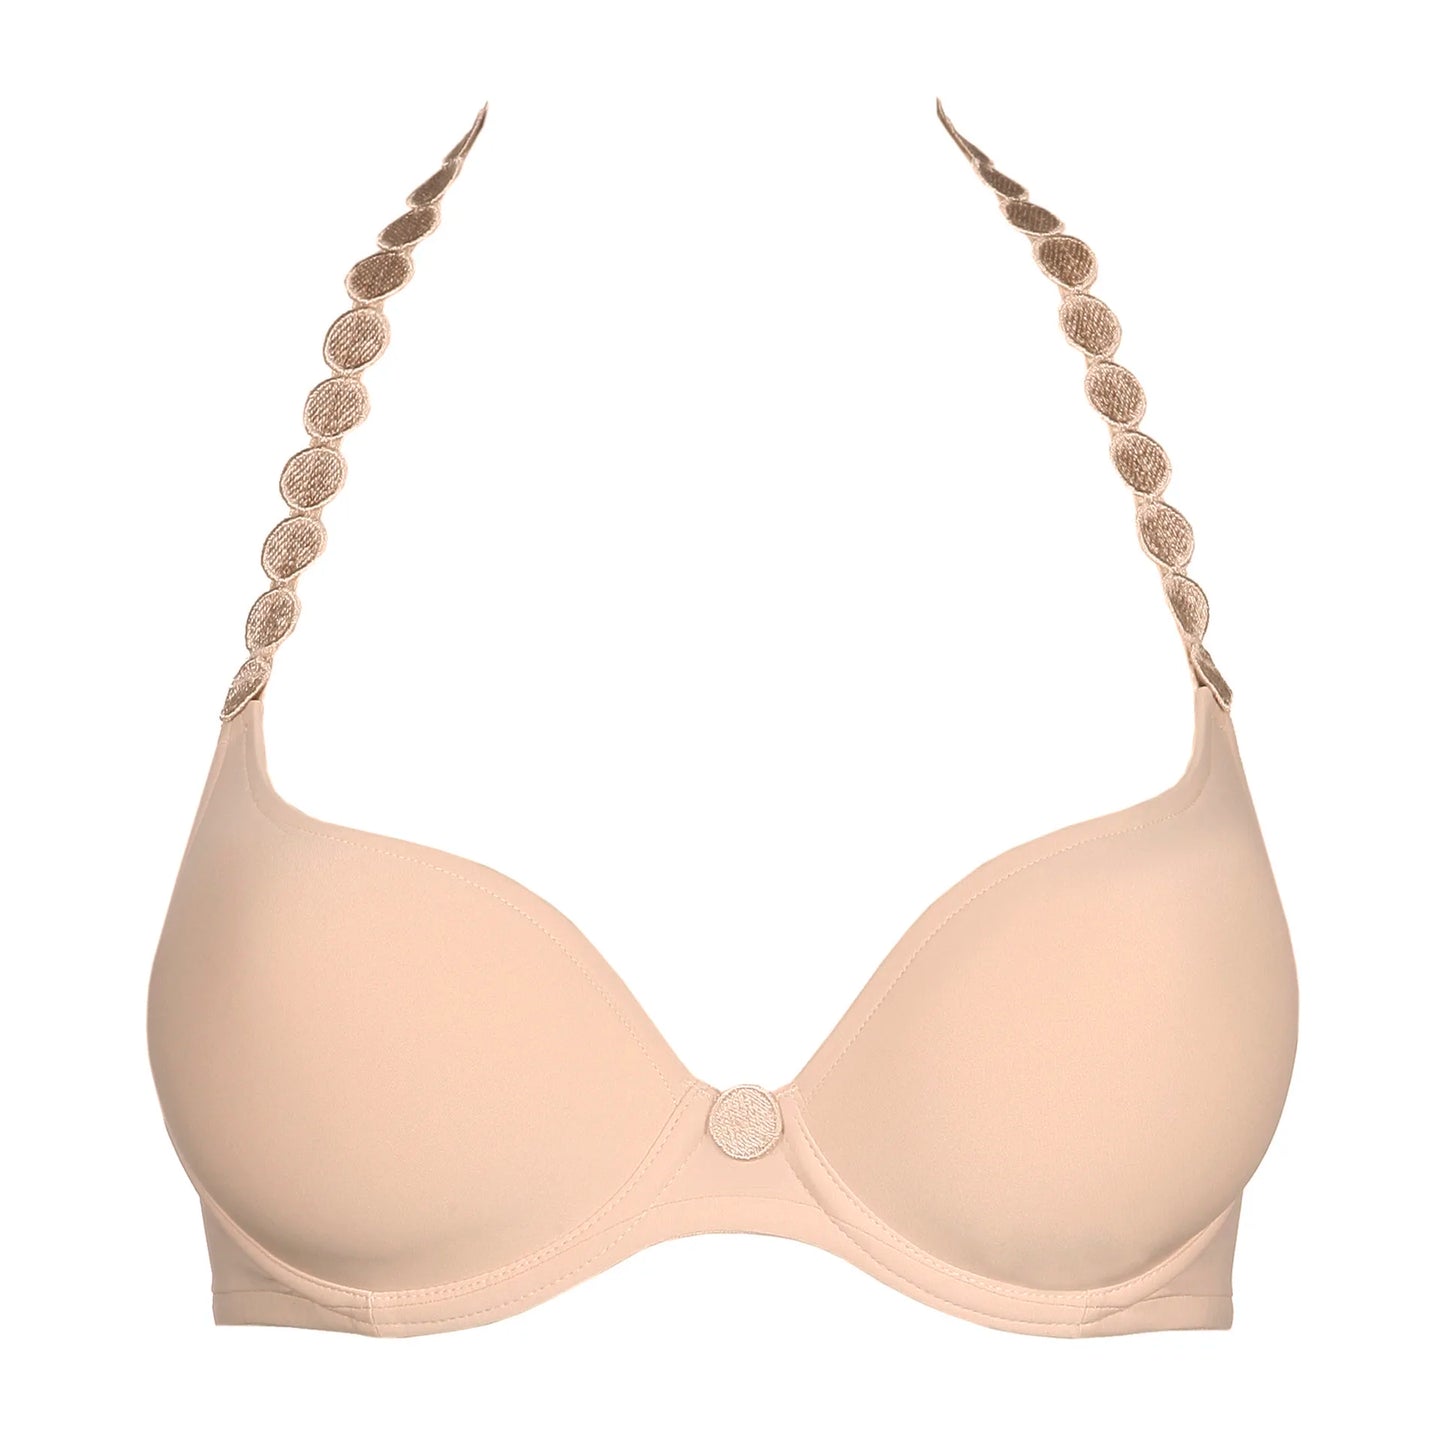 Come In to Try the Tom Heart Shape Bra by Marie Jo Today